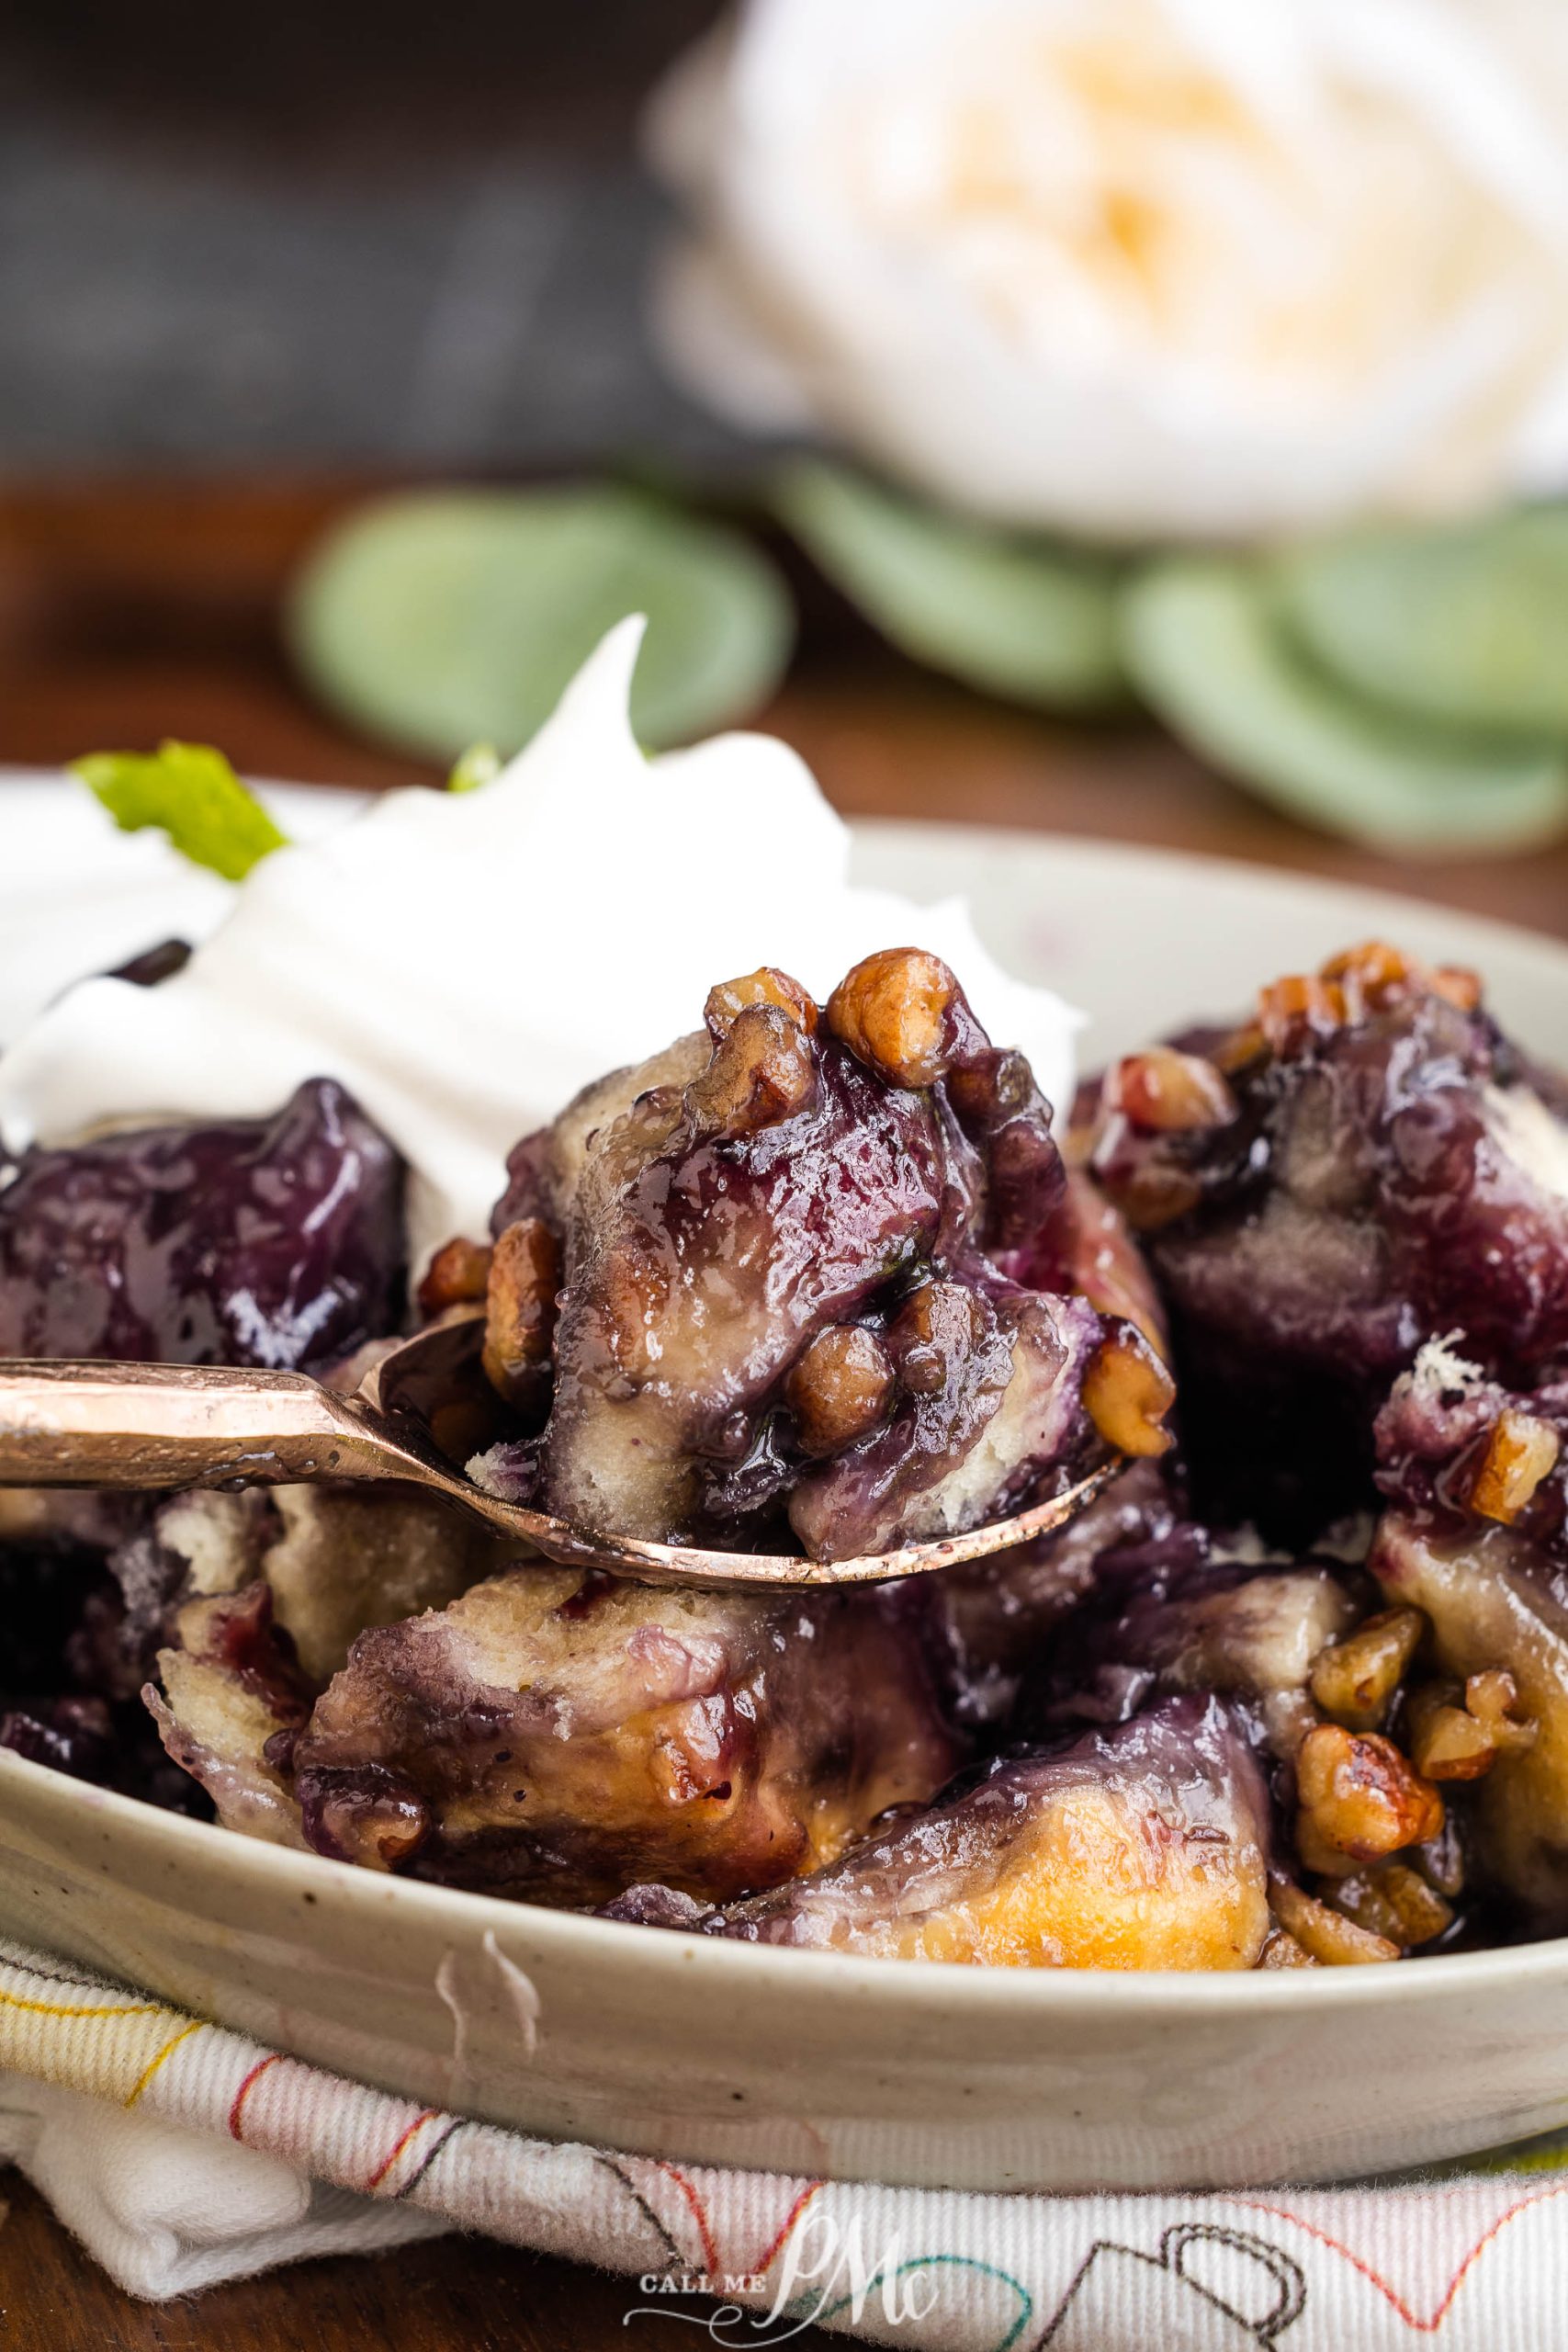 A close-up of blueberry cobbler in a bowl, topped with pecans and whipped cream. A spoon is lifting a portion of the dessert.